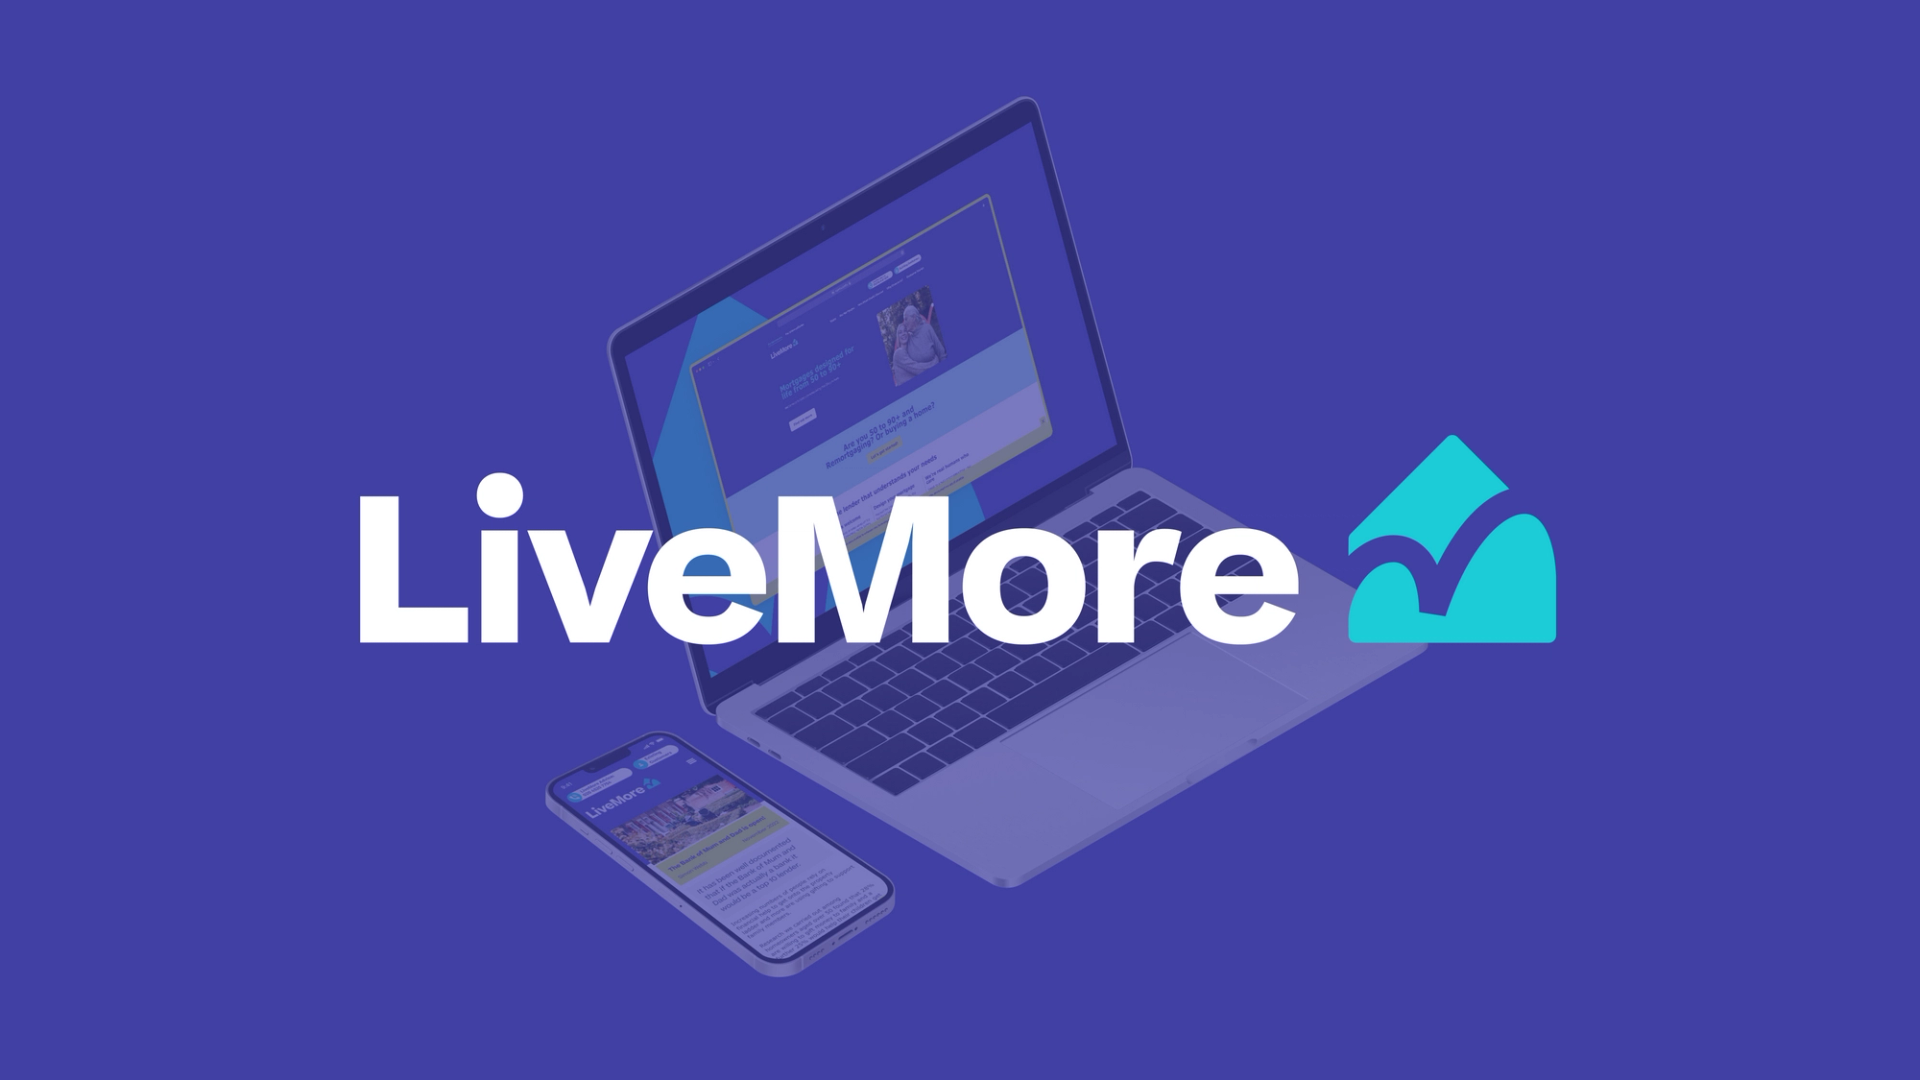 Livemore logo with two wireframes in the background